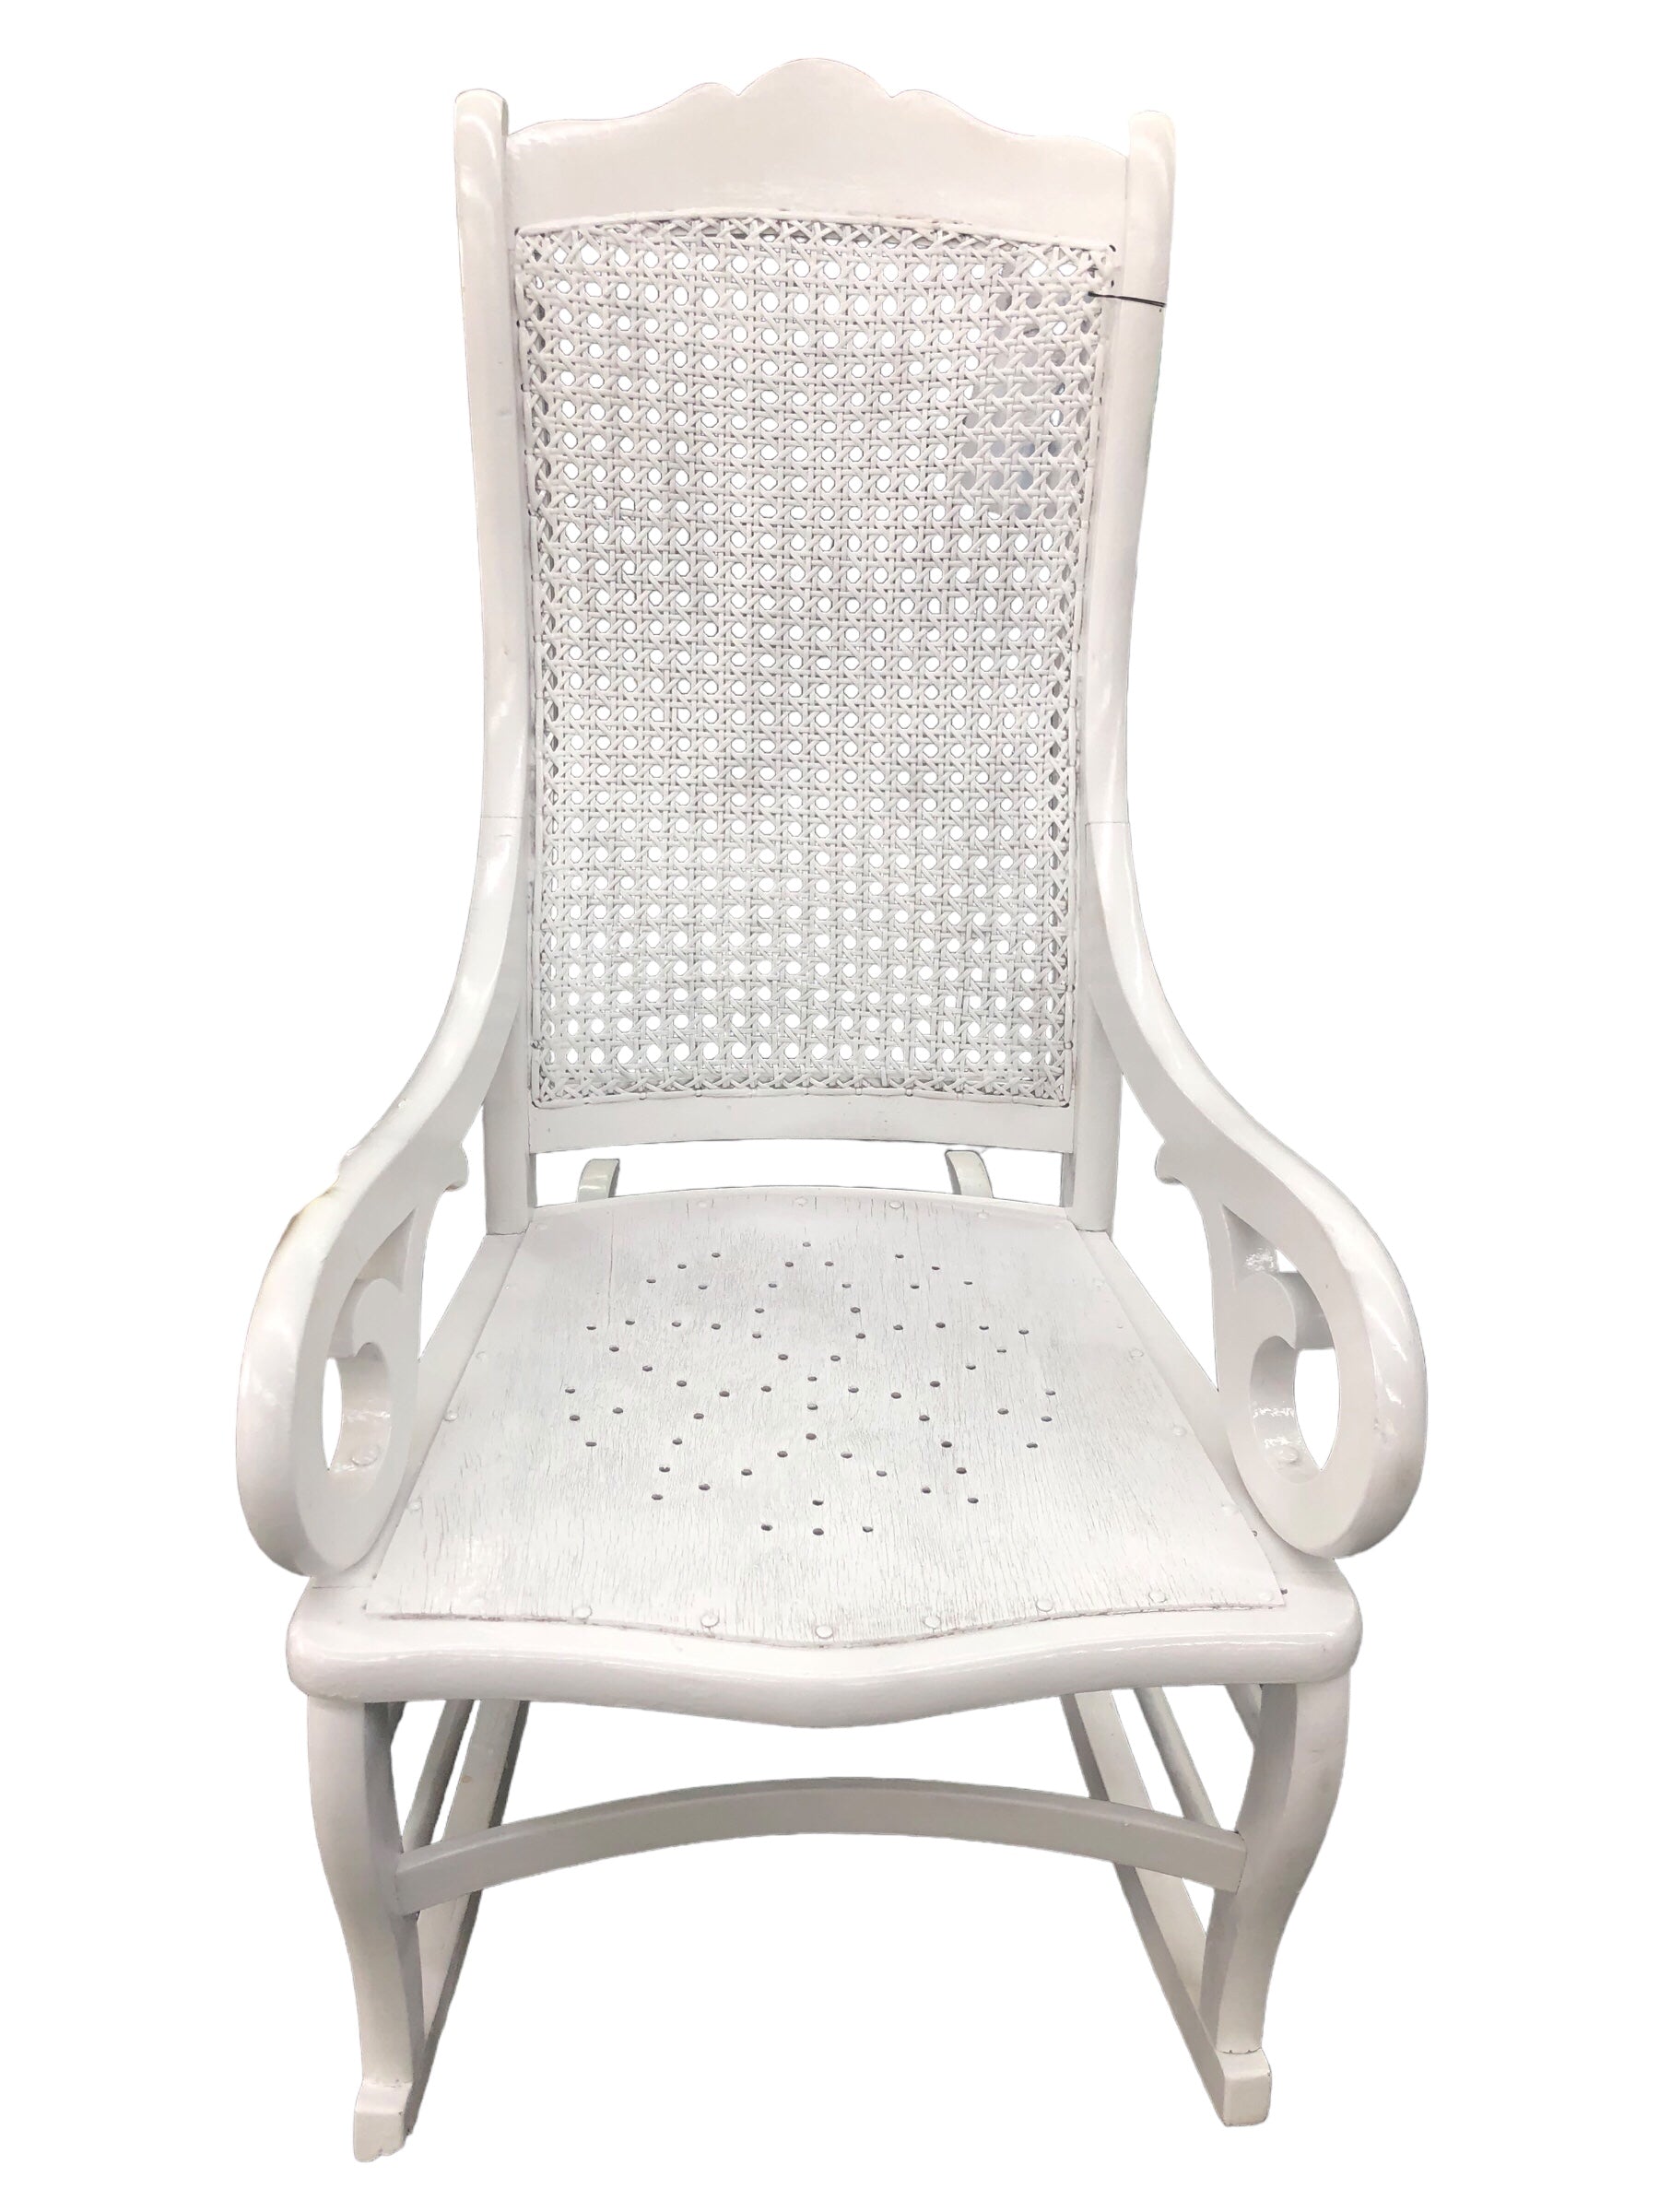 White Rocking Chair with Caning